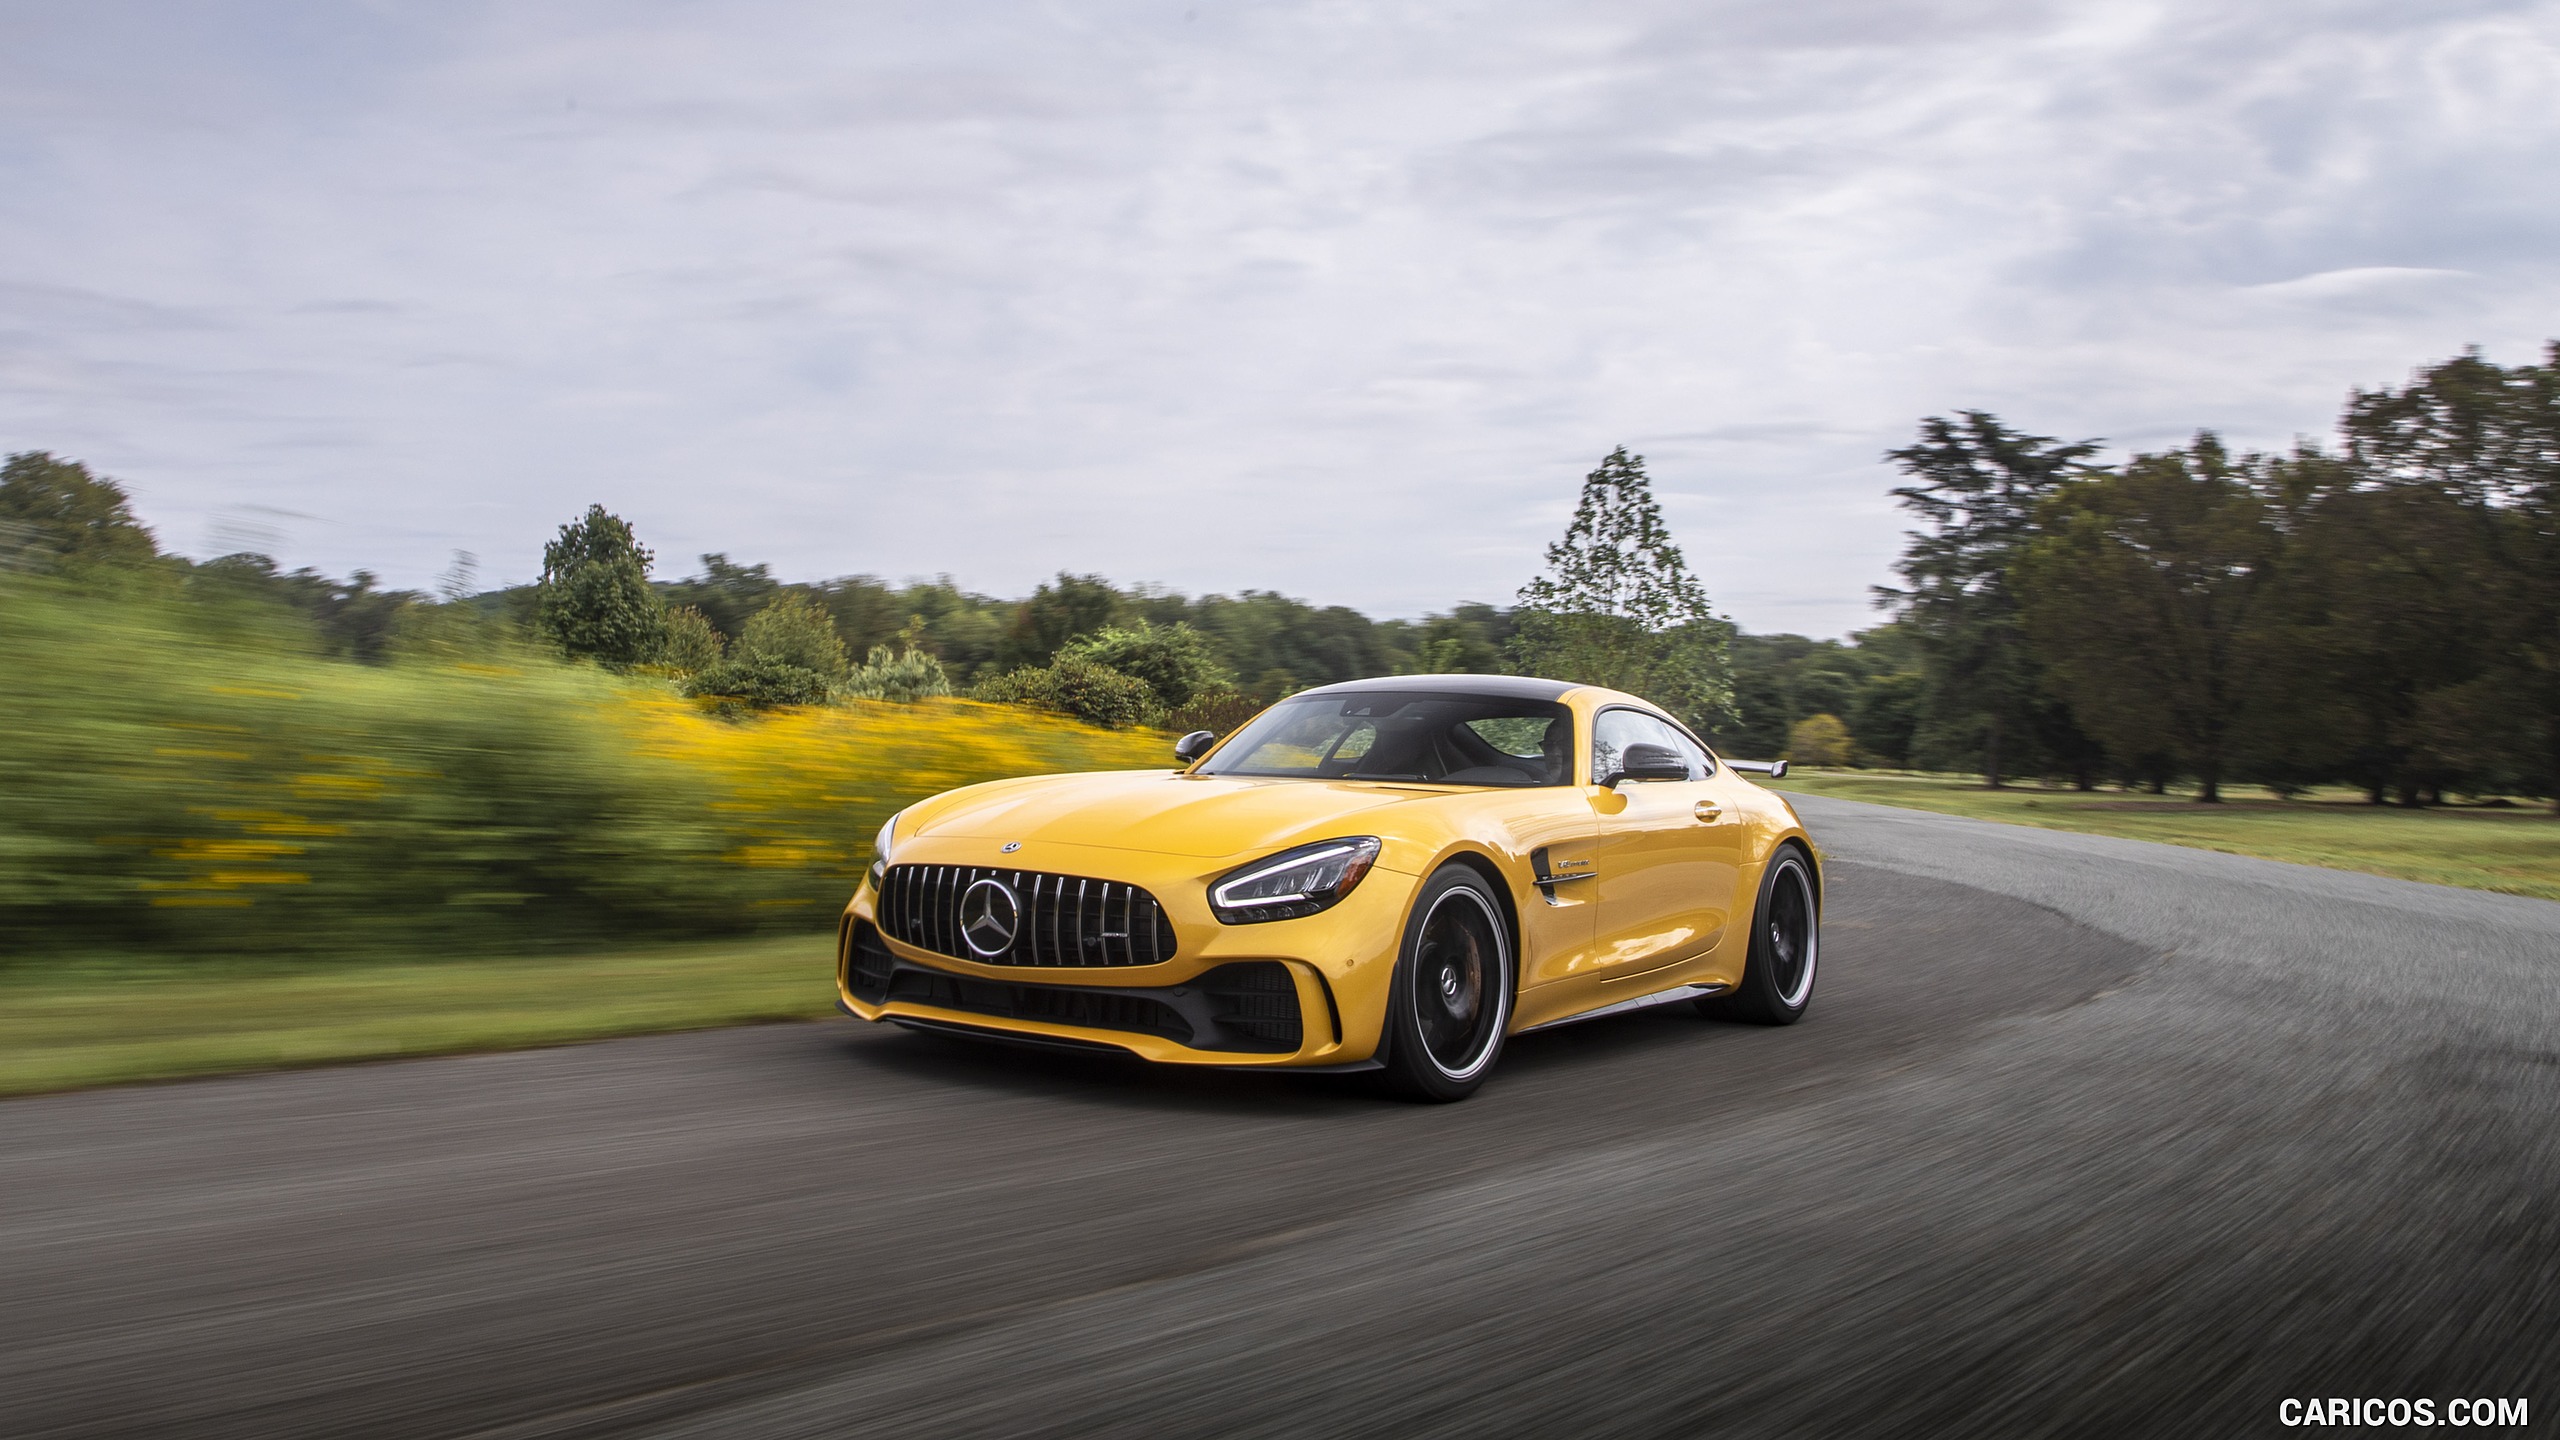 2020 Mercedes-AMG GT R Coupe (US-Spec) - Front Three-Quarter, #255 of 328